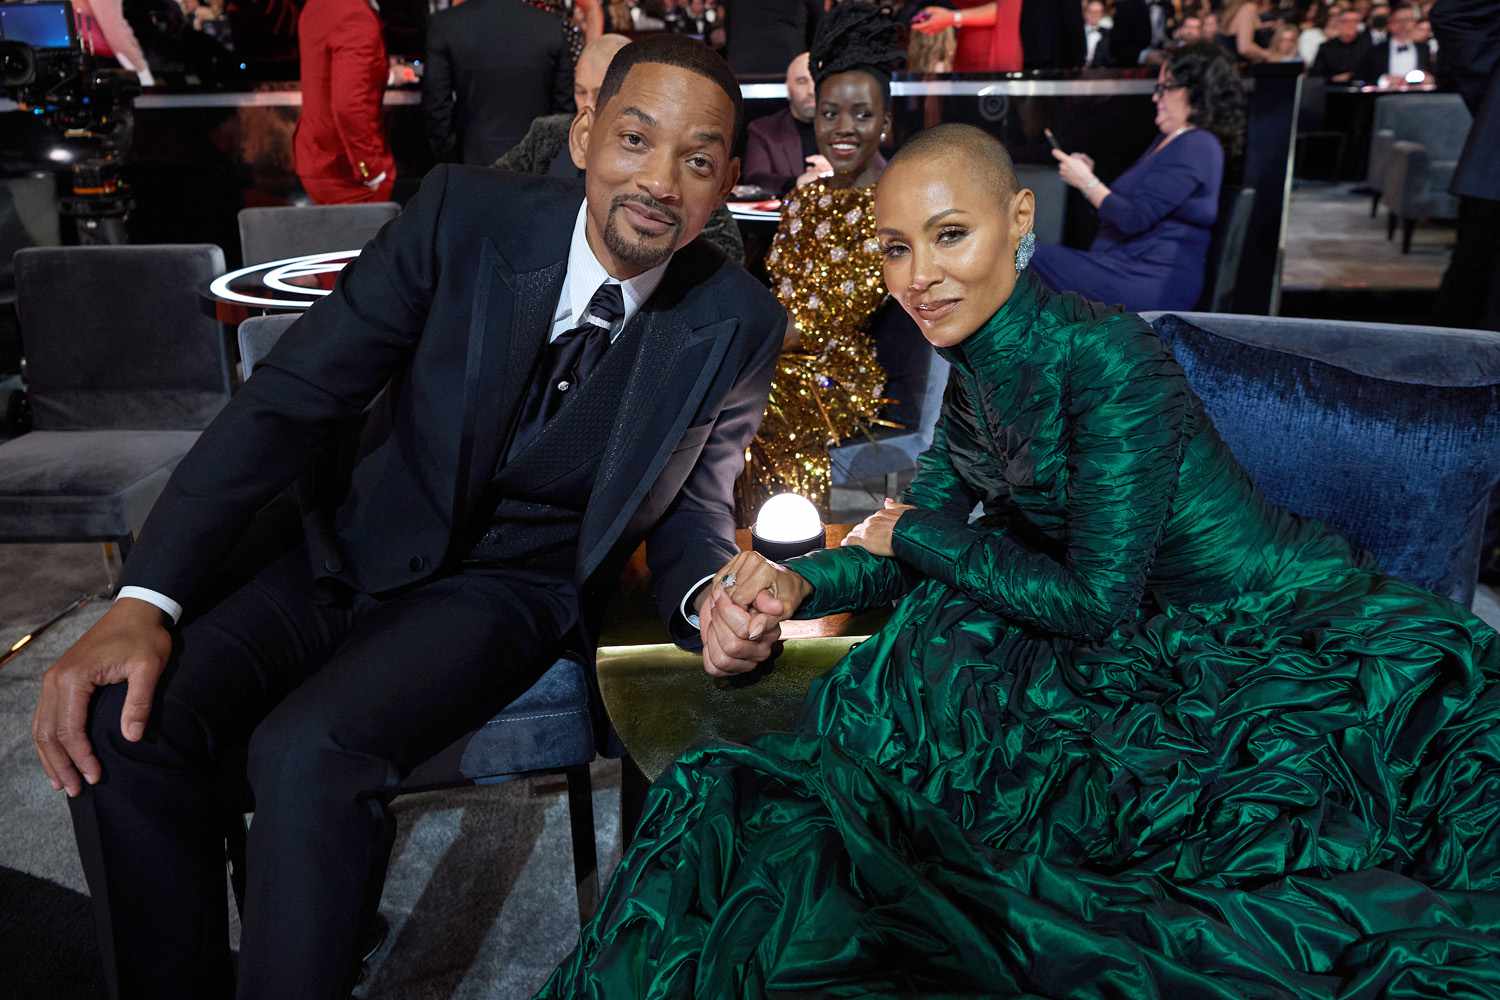 Jada Smith Speaks On Her Marriage; Reveals There Is No Separation Plans With Will Smith, Yours Truly, People, November 29, 2023